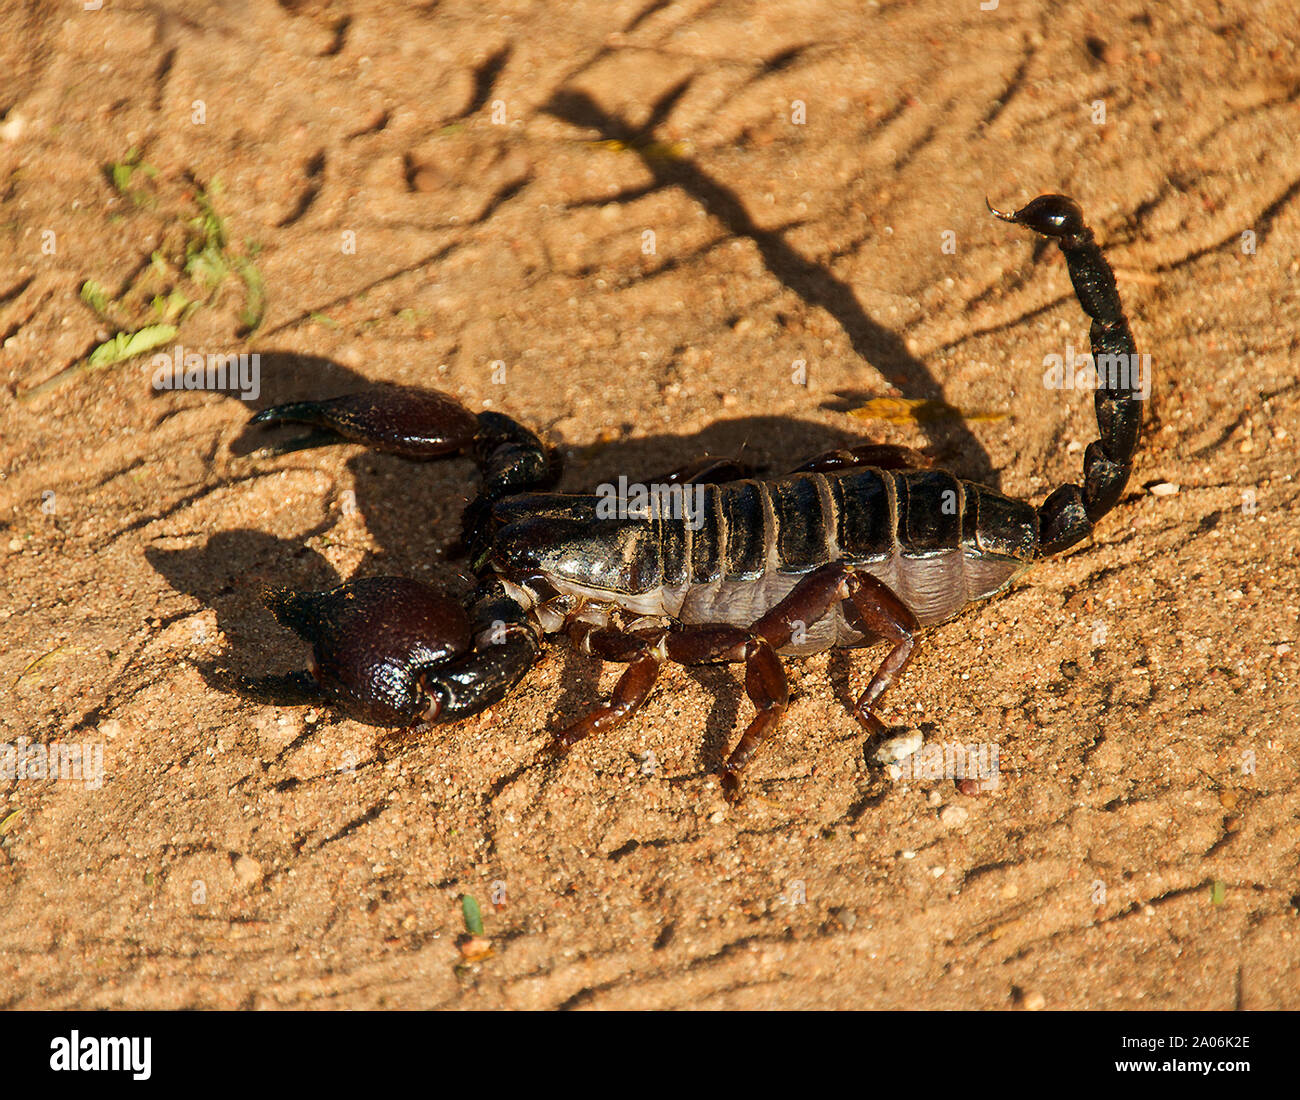 A large and relatively docile scorpion, the Black Burrowing Scorpion has a weak venom that poses no threat to humans, Stock Photo